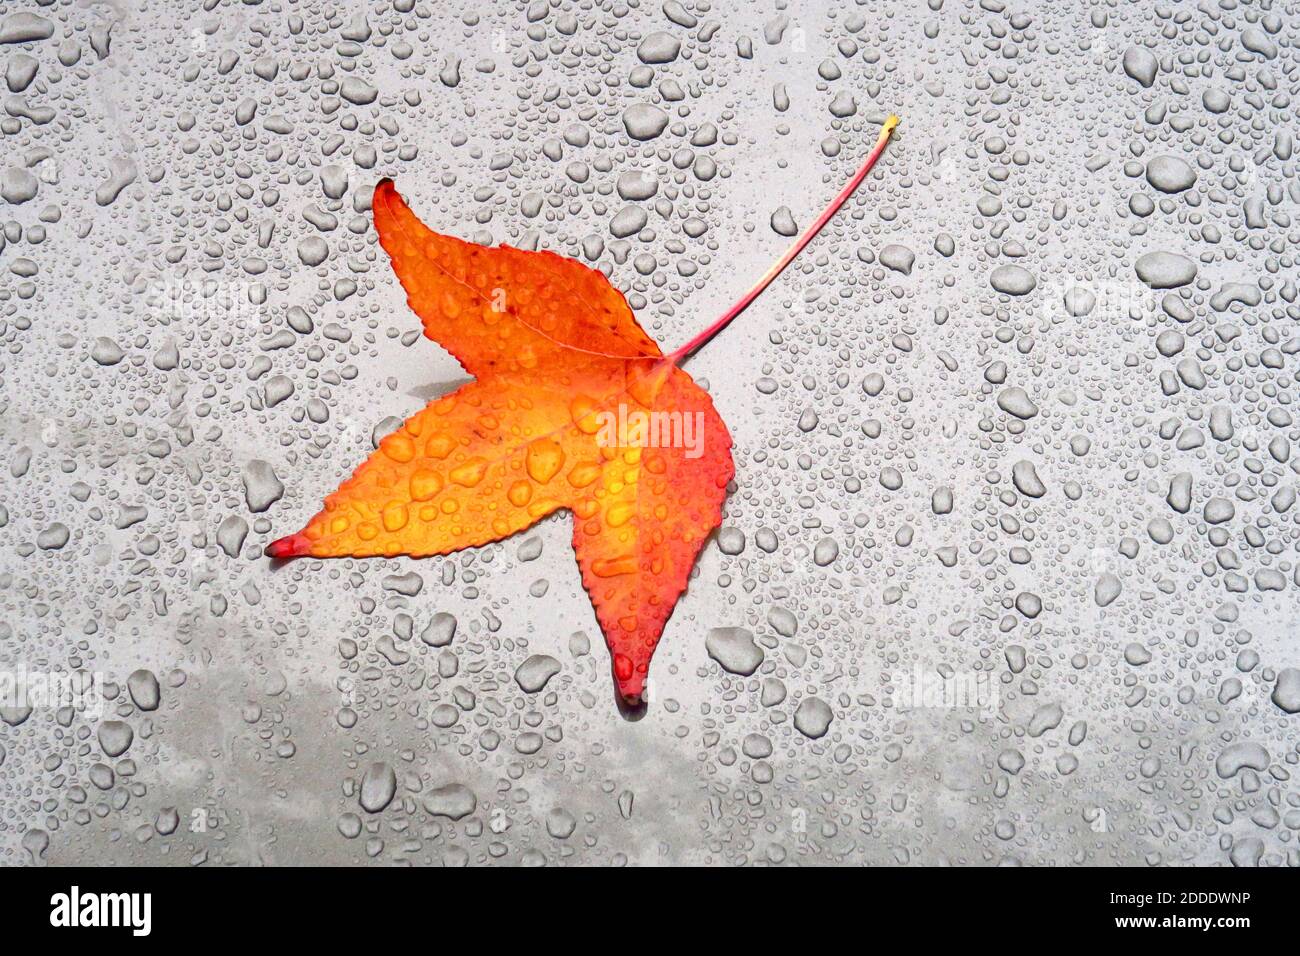 Autumn leaf lying on car hood covered in raindrops Stock Photo